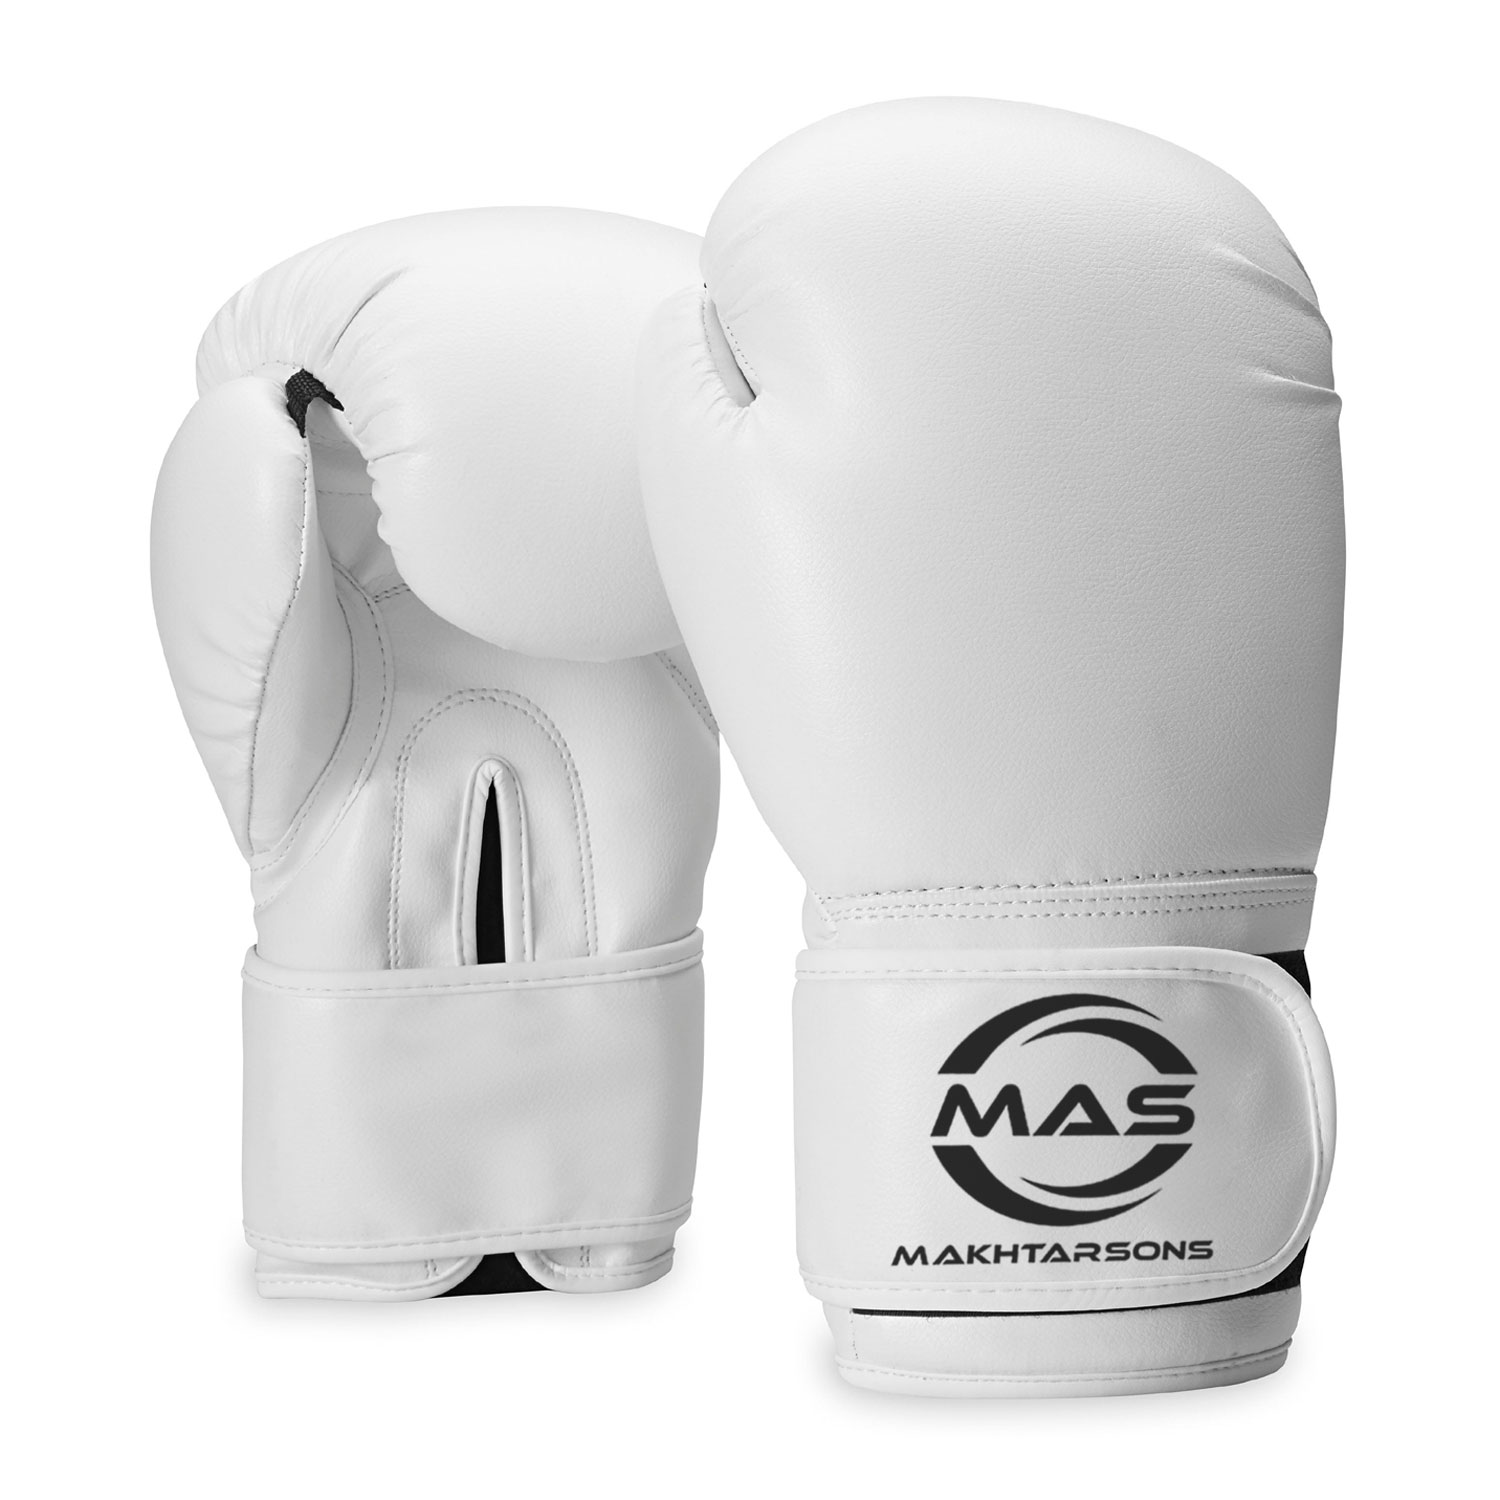 PROFESSIONAL BOXING GLOVES | MAS 206